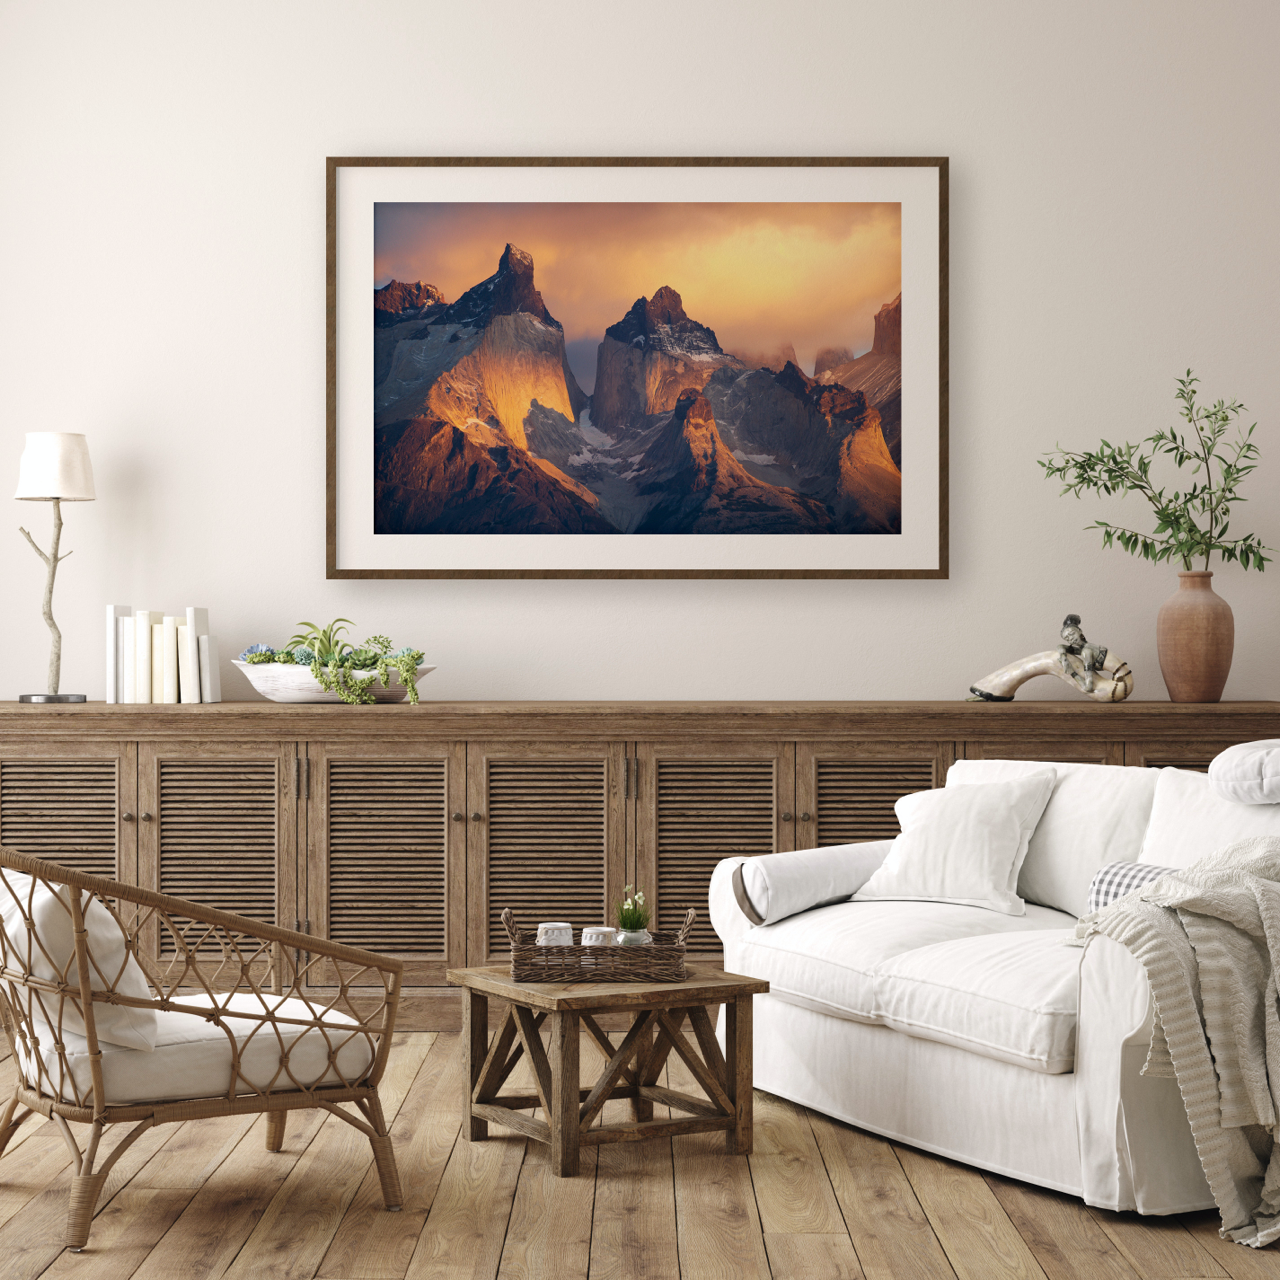 framed mountain photograph in living room